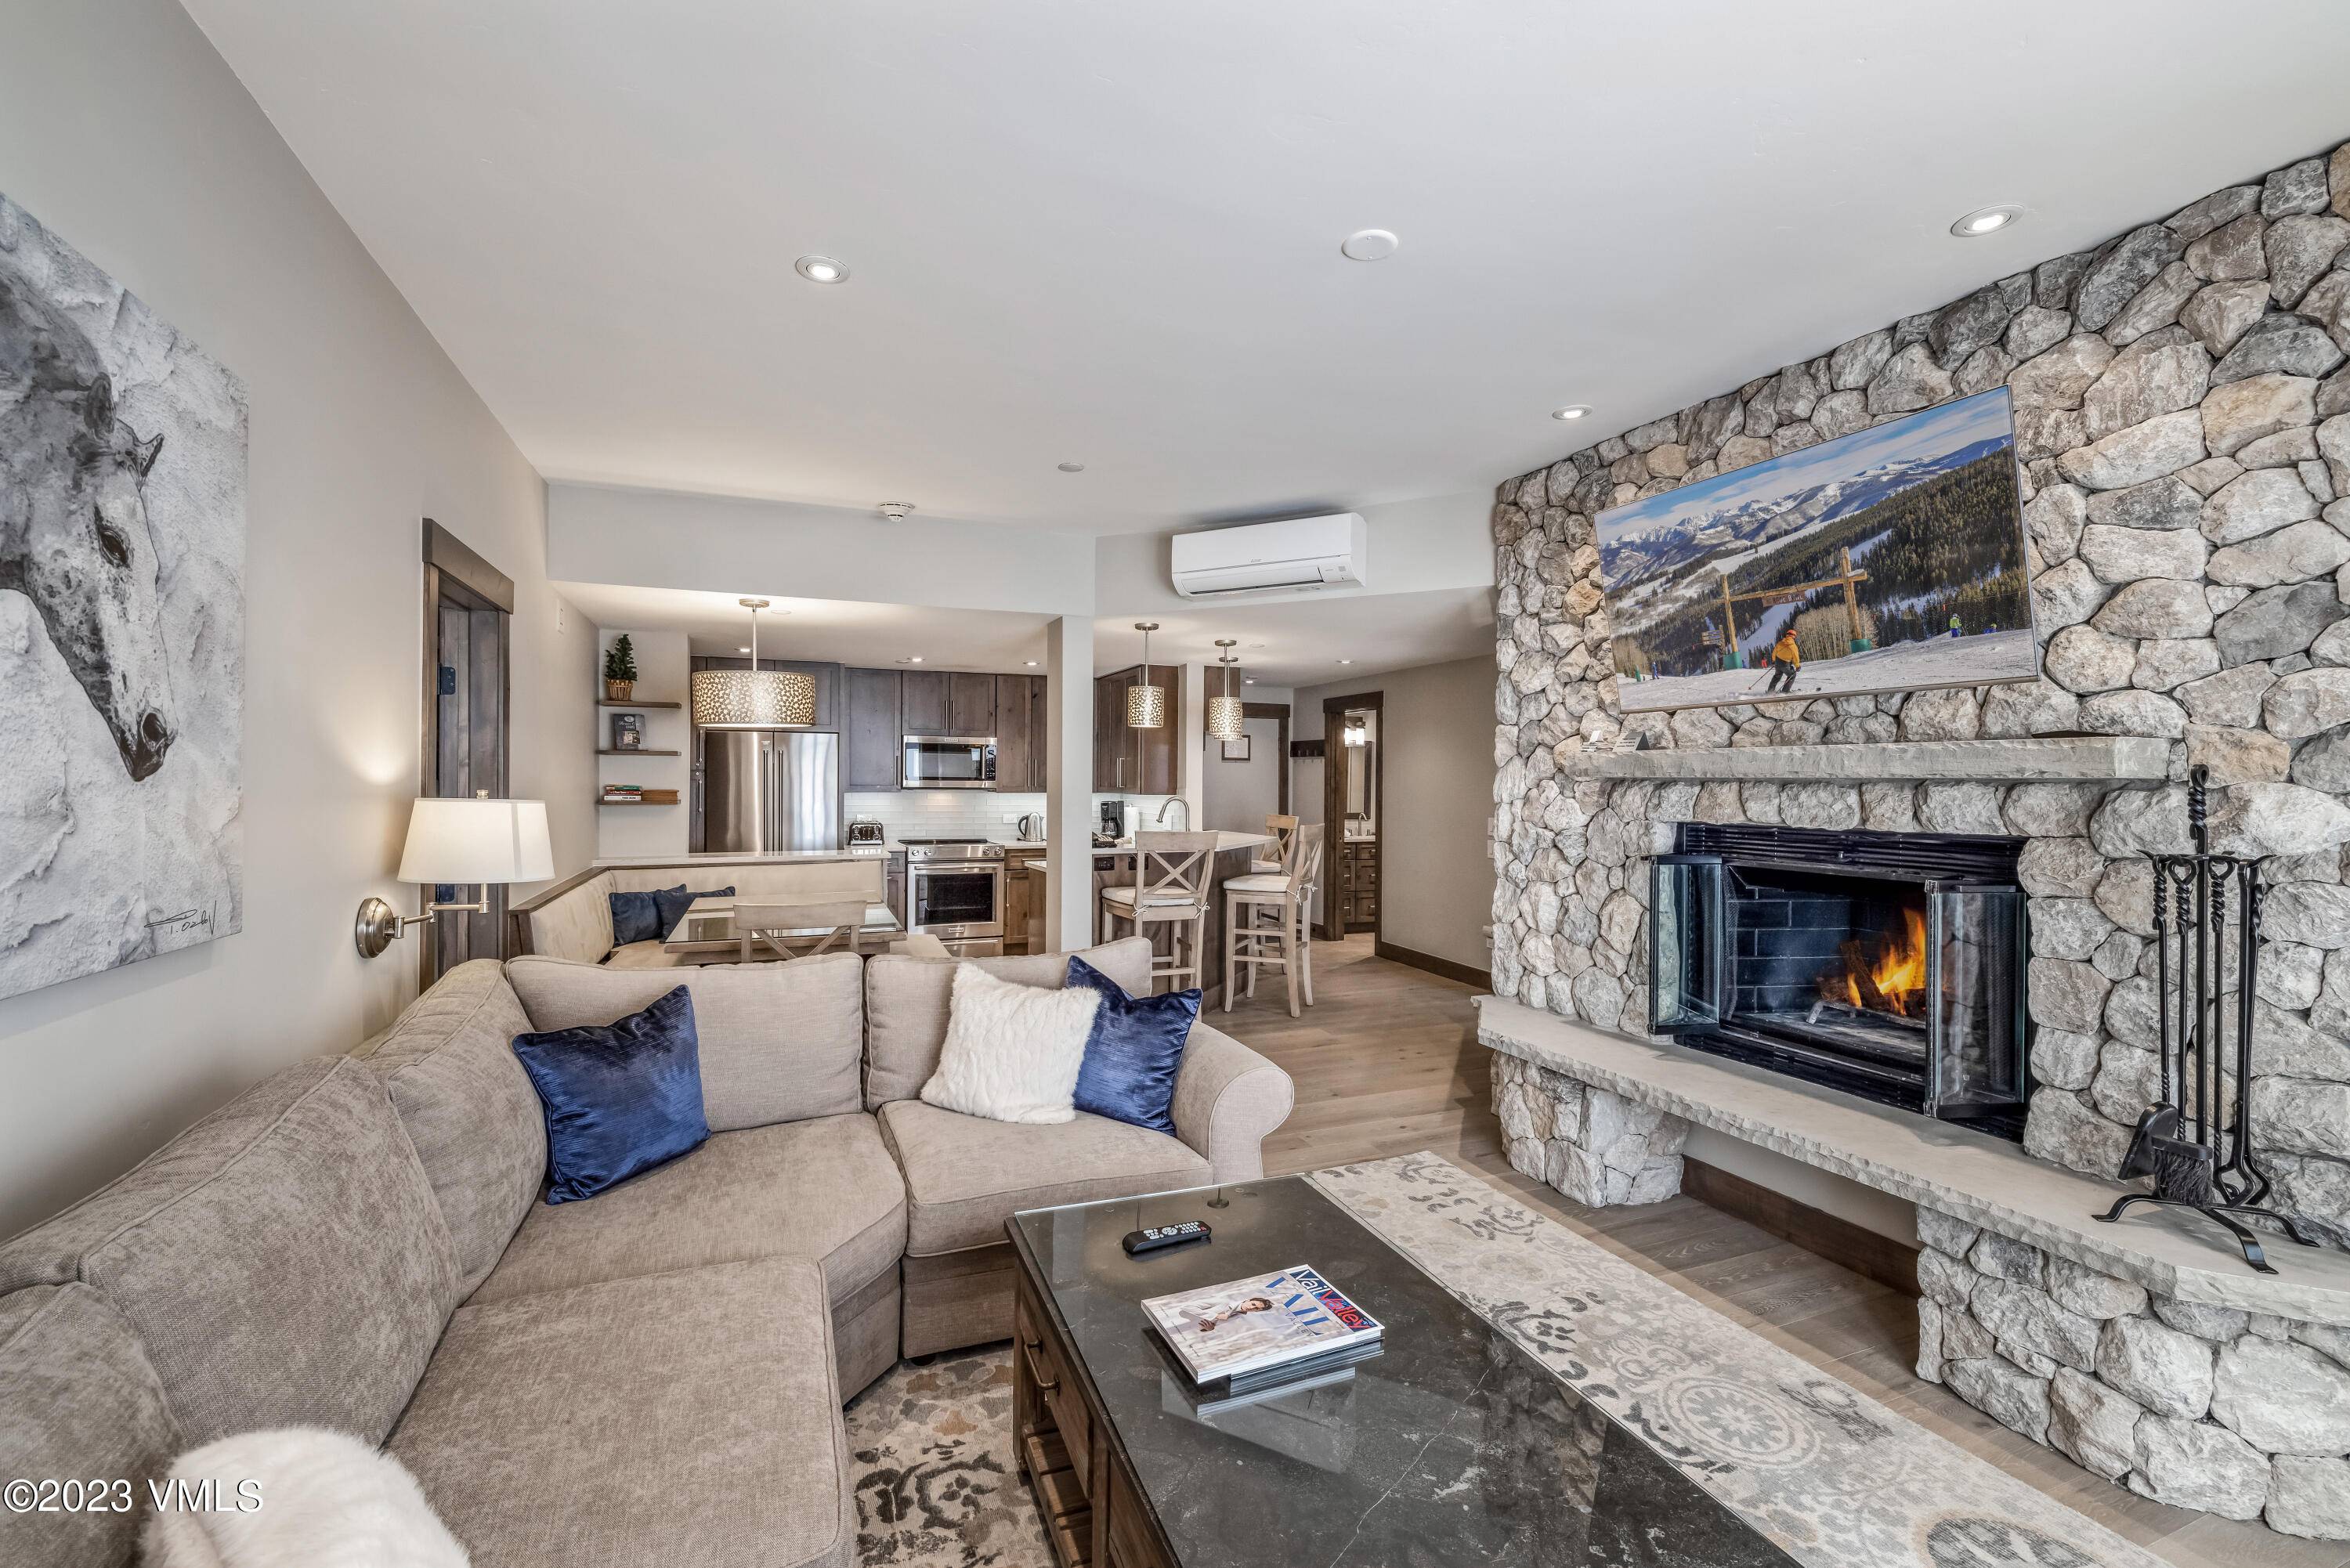 Newly remodeled 2 Bedroom, 2 Bathroom Charter residence provides an optimal ski in ski out experience with supreme views of Beaver Creek's Strawberry Park and Grouse Mountain.